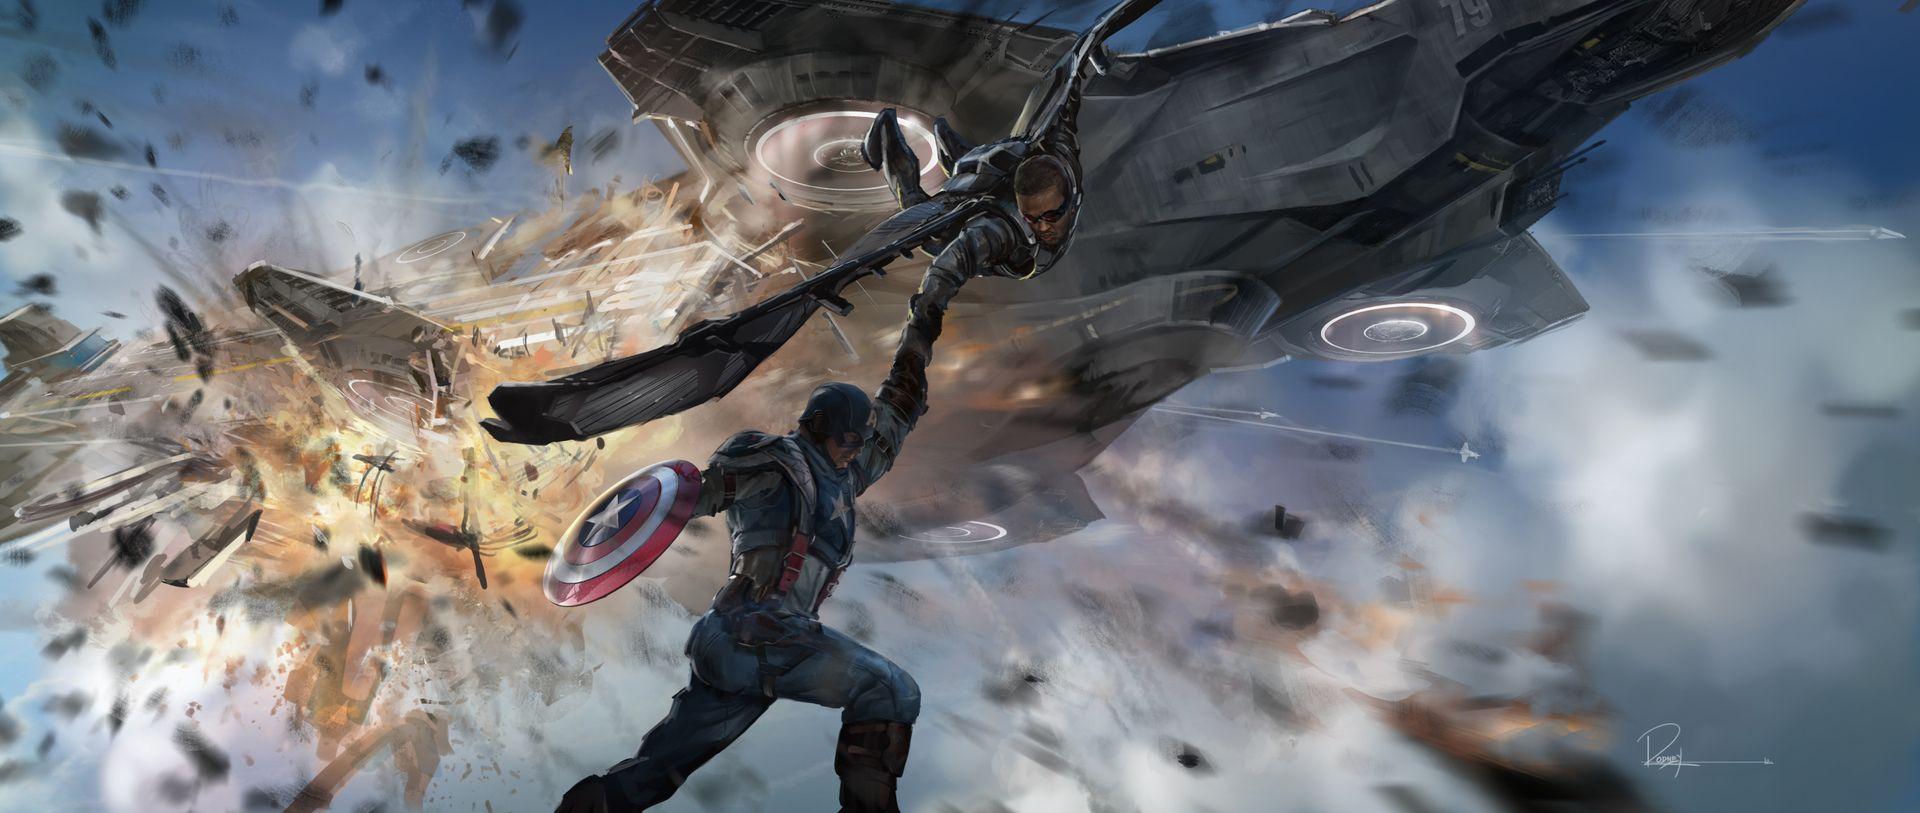 Captain America and Falcon Concept. Marvel Movies